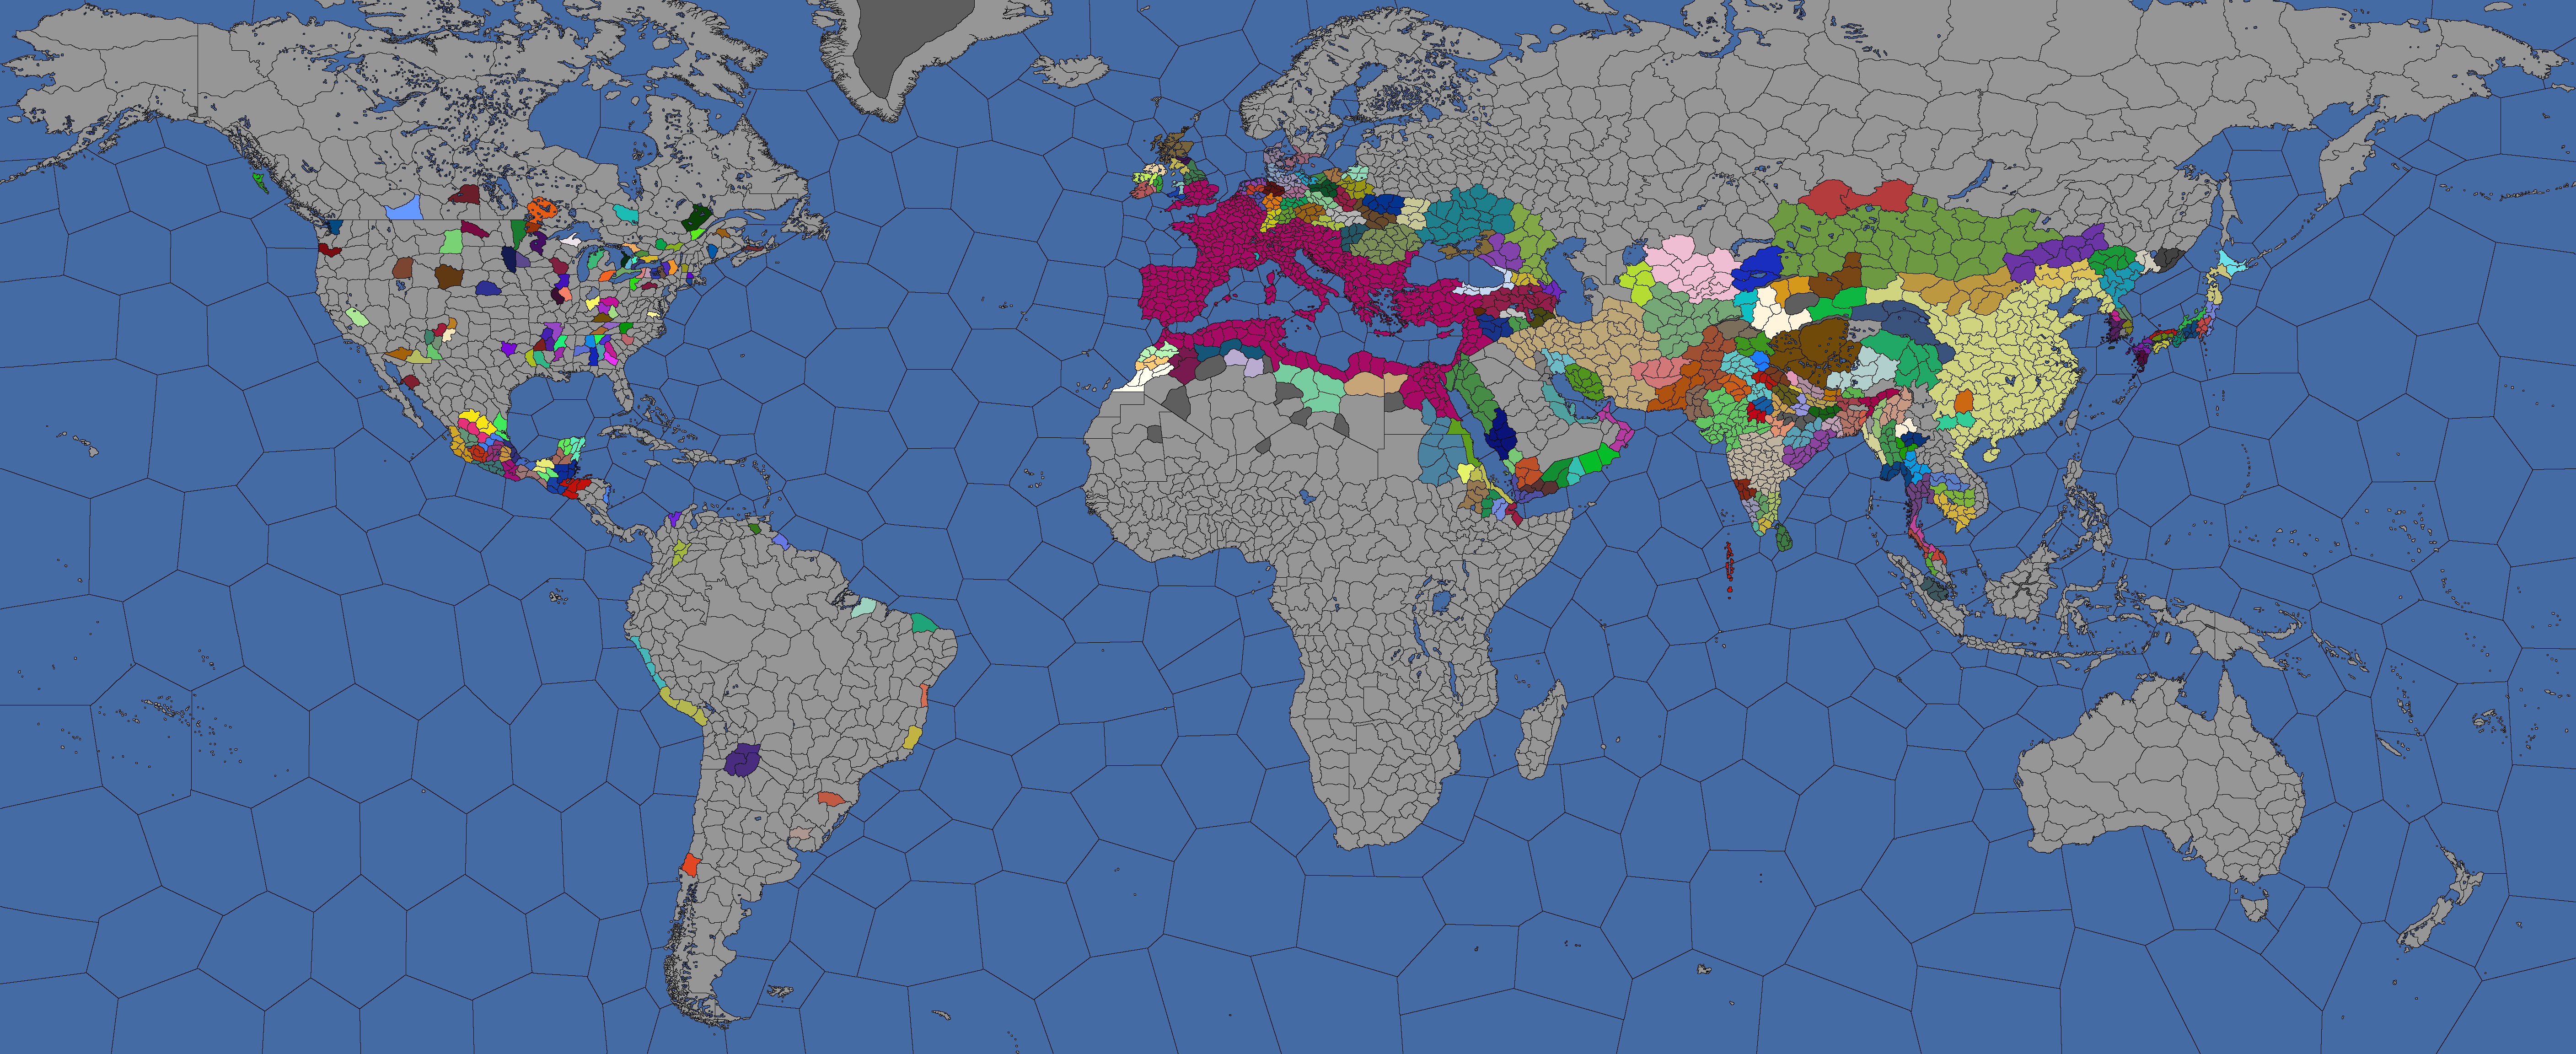 europa universalis 4 extended timeline mod for 1.11